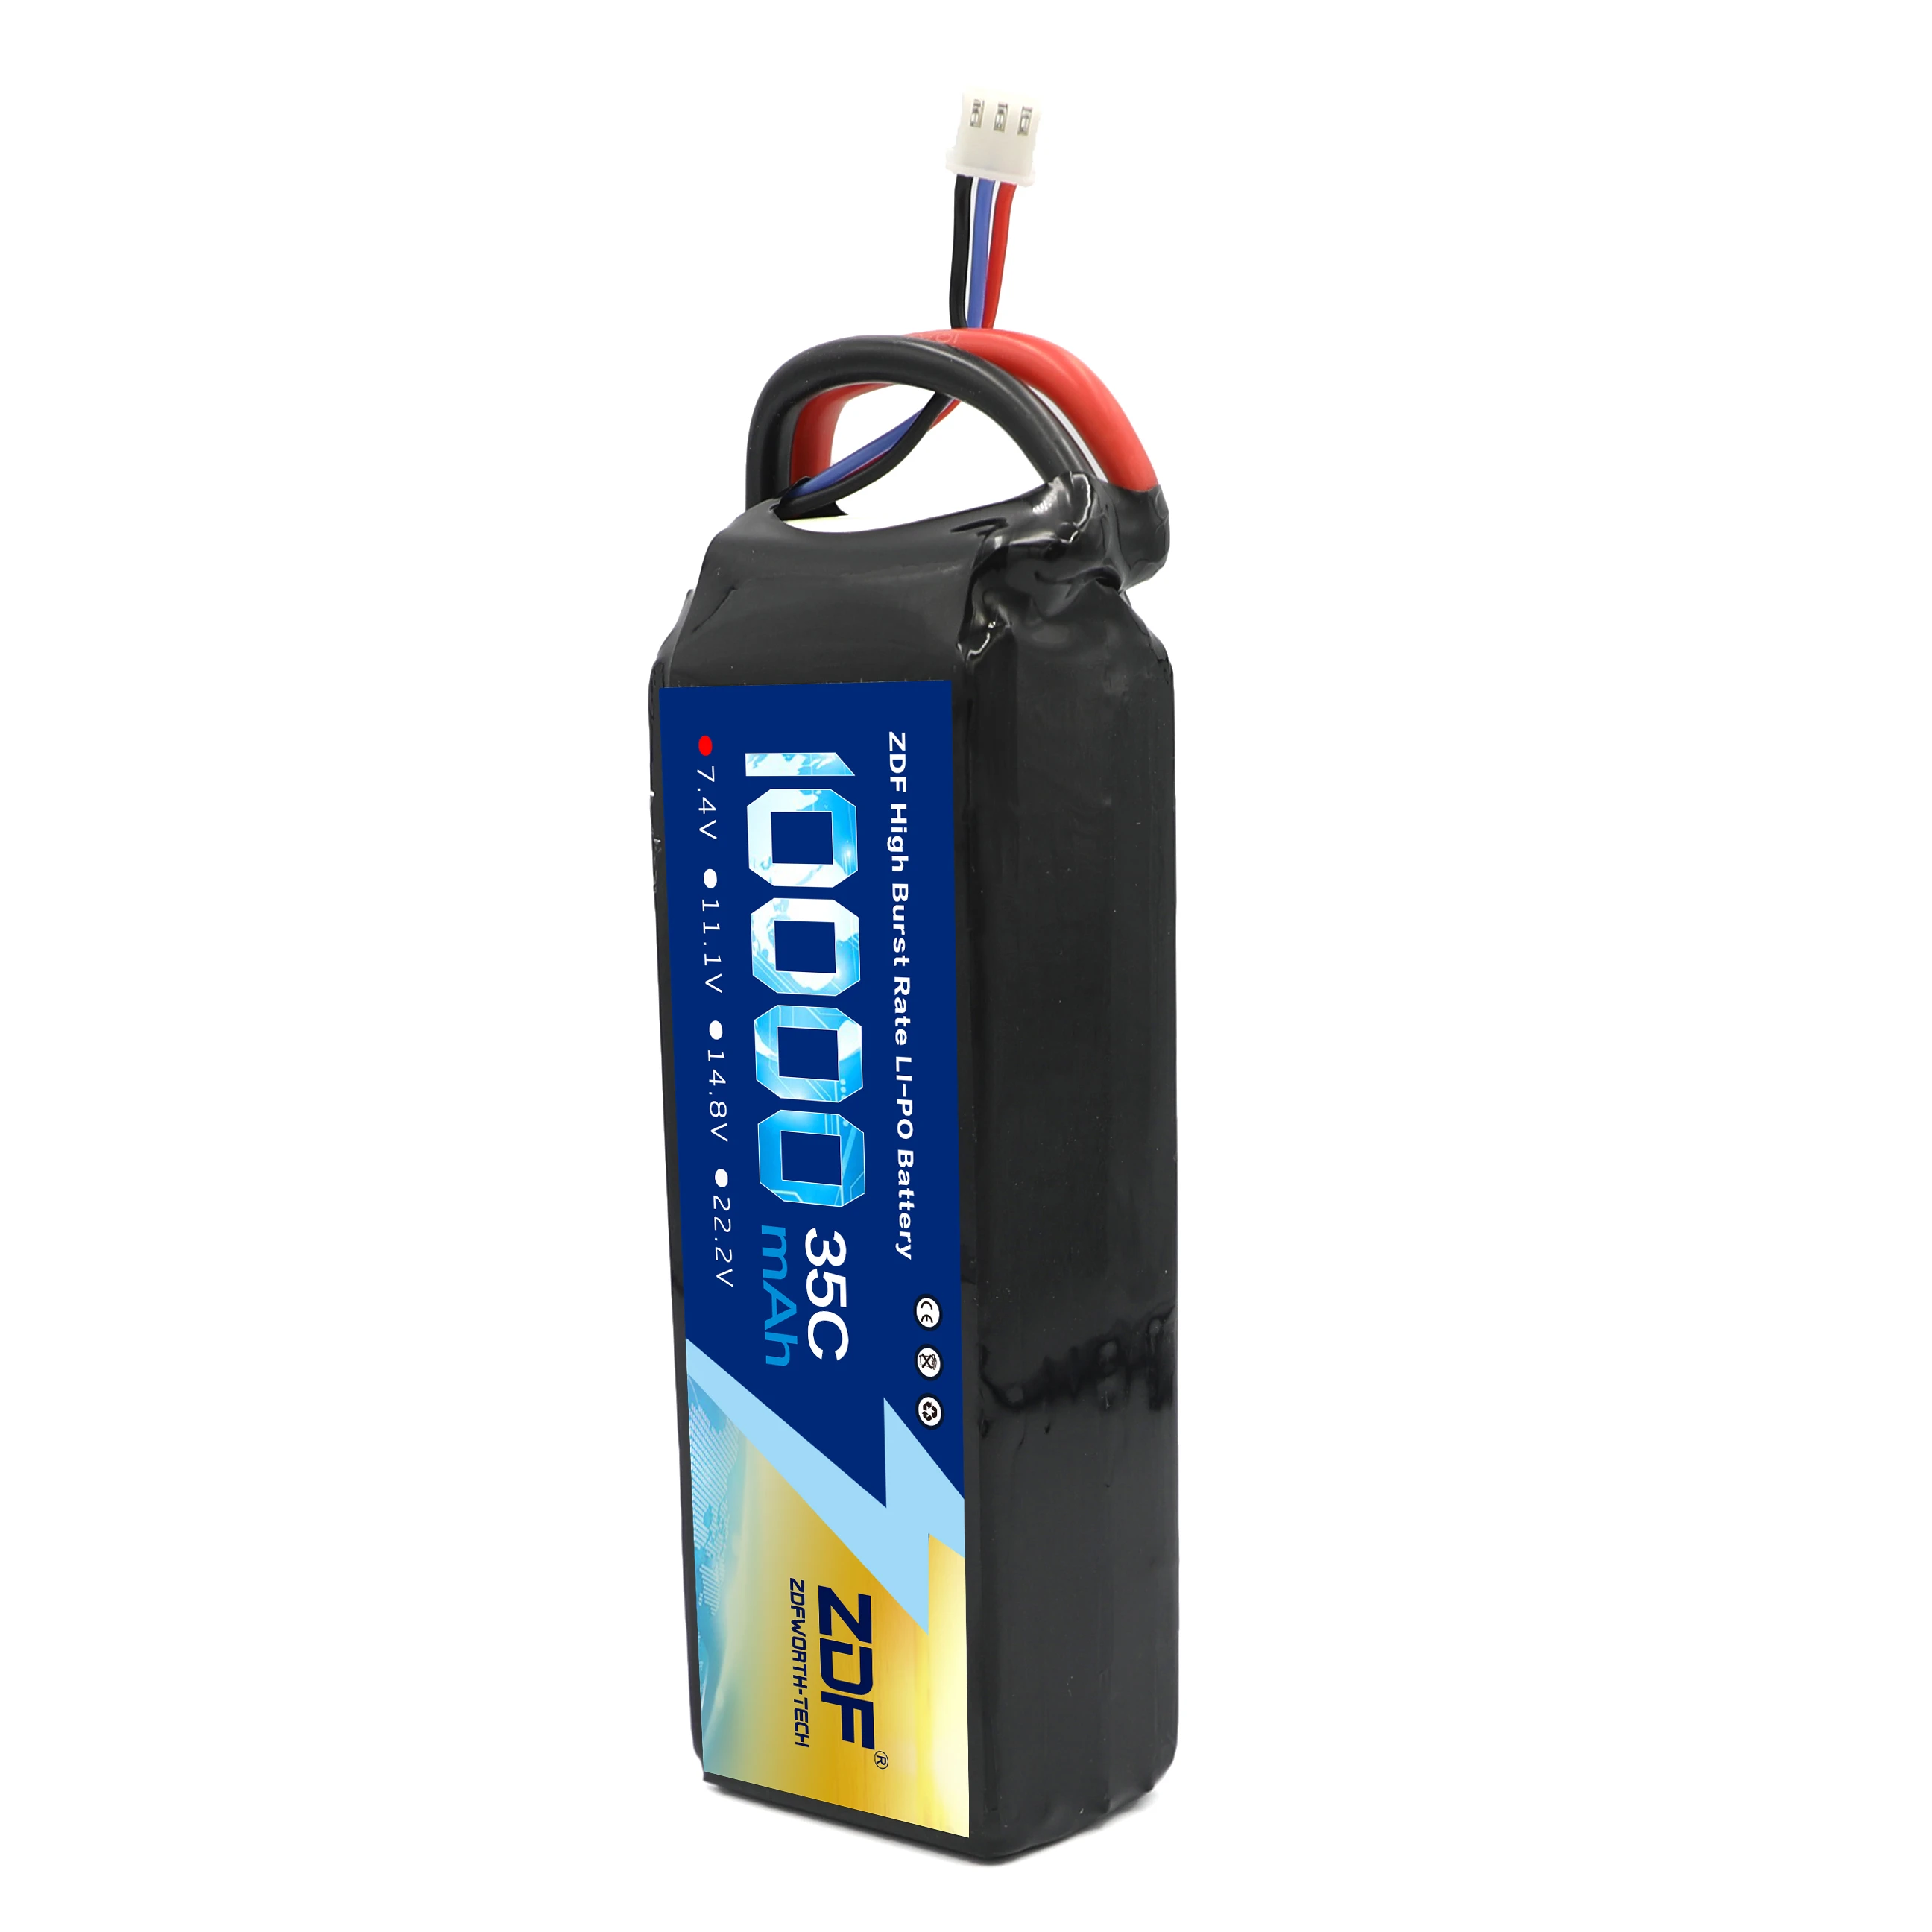 ZDF Lipo Battery 2S 3S 7.4V / 11.1V / 14.8V 10000mah 35C 70C XT90 / XT60/ T Plug For RC Drone Airplane Car Truck Boat